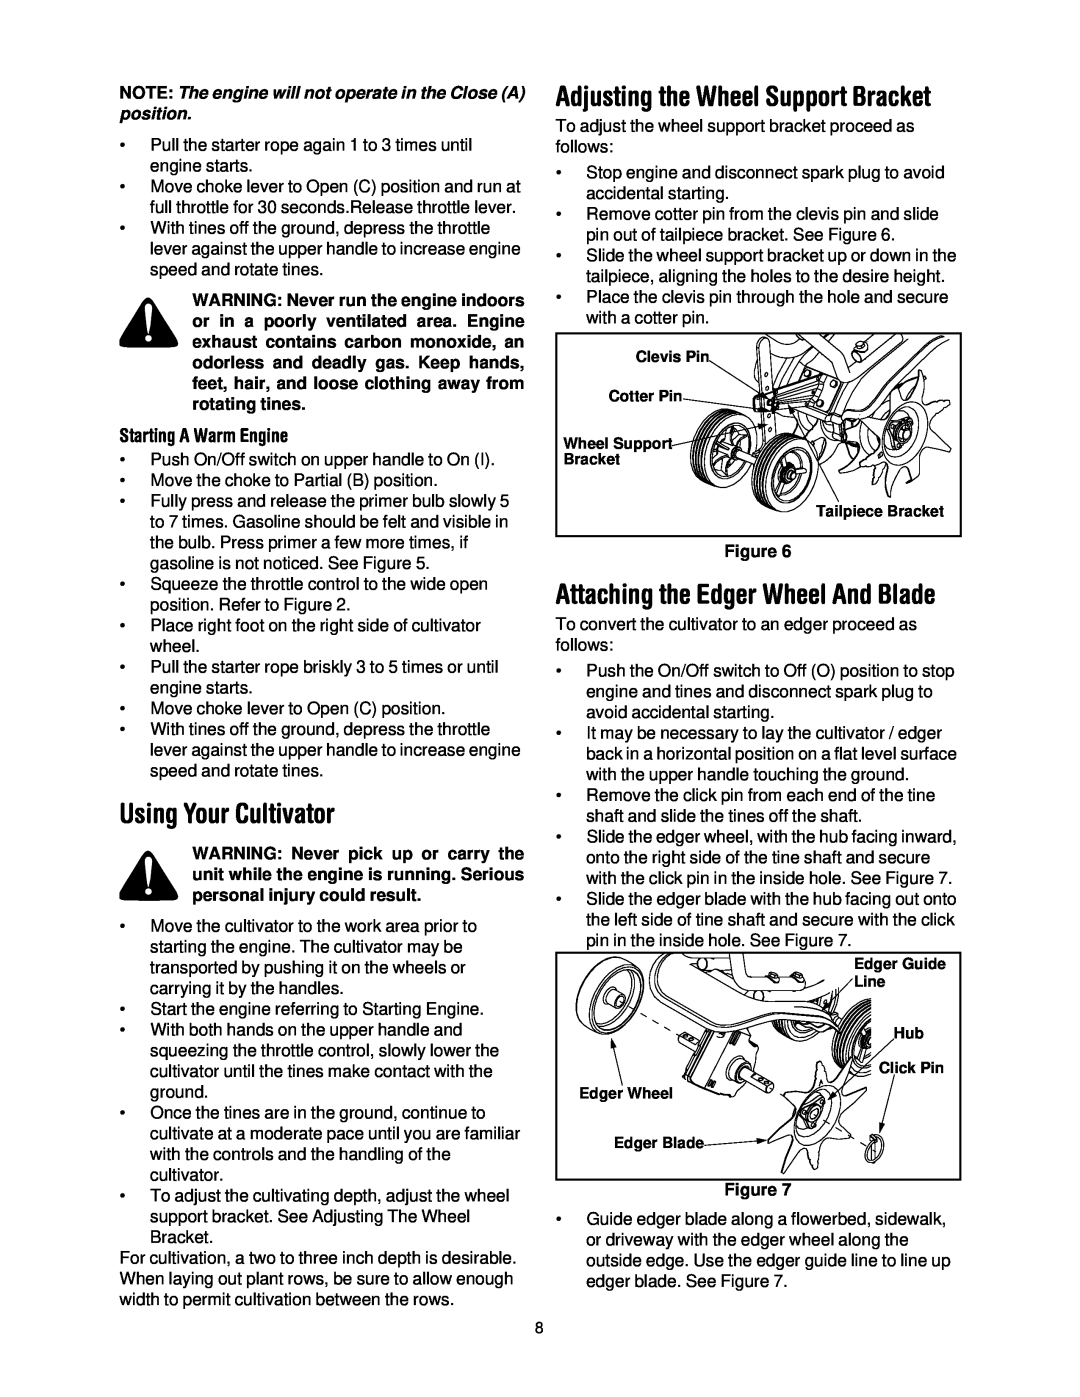 Craftsman 316.2927 manual Using Your Cultivator, Adjusting the Wheel Support Bracket, Attaching the Edger Wheel And Blade 